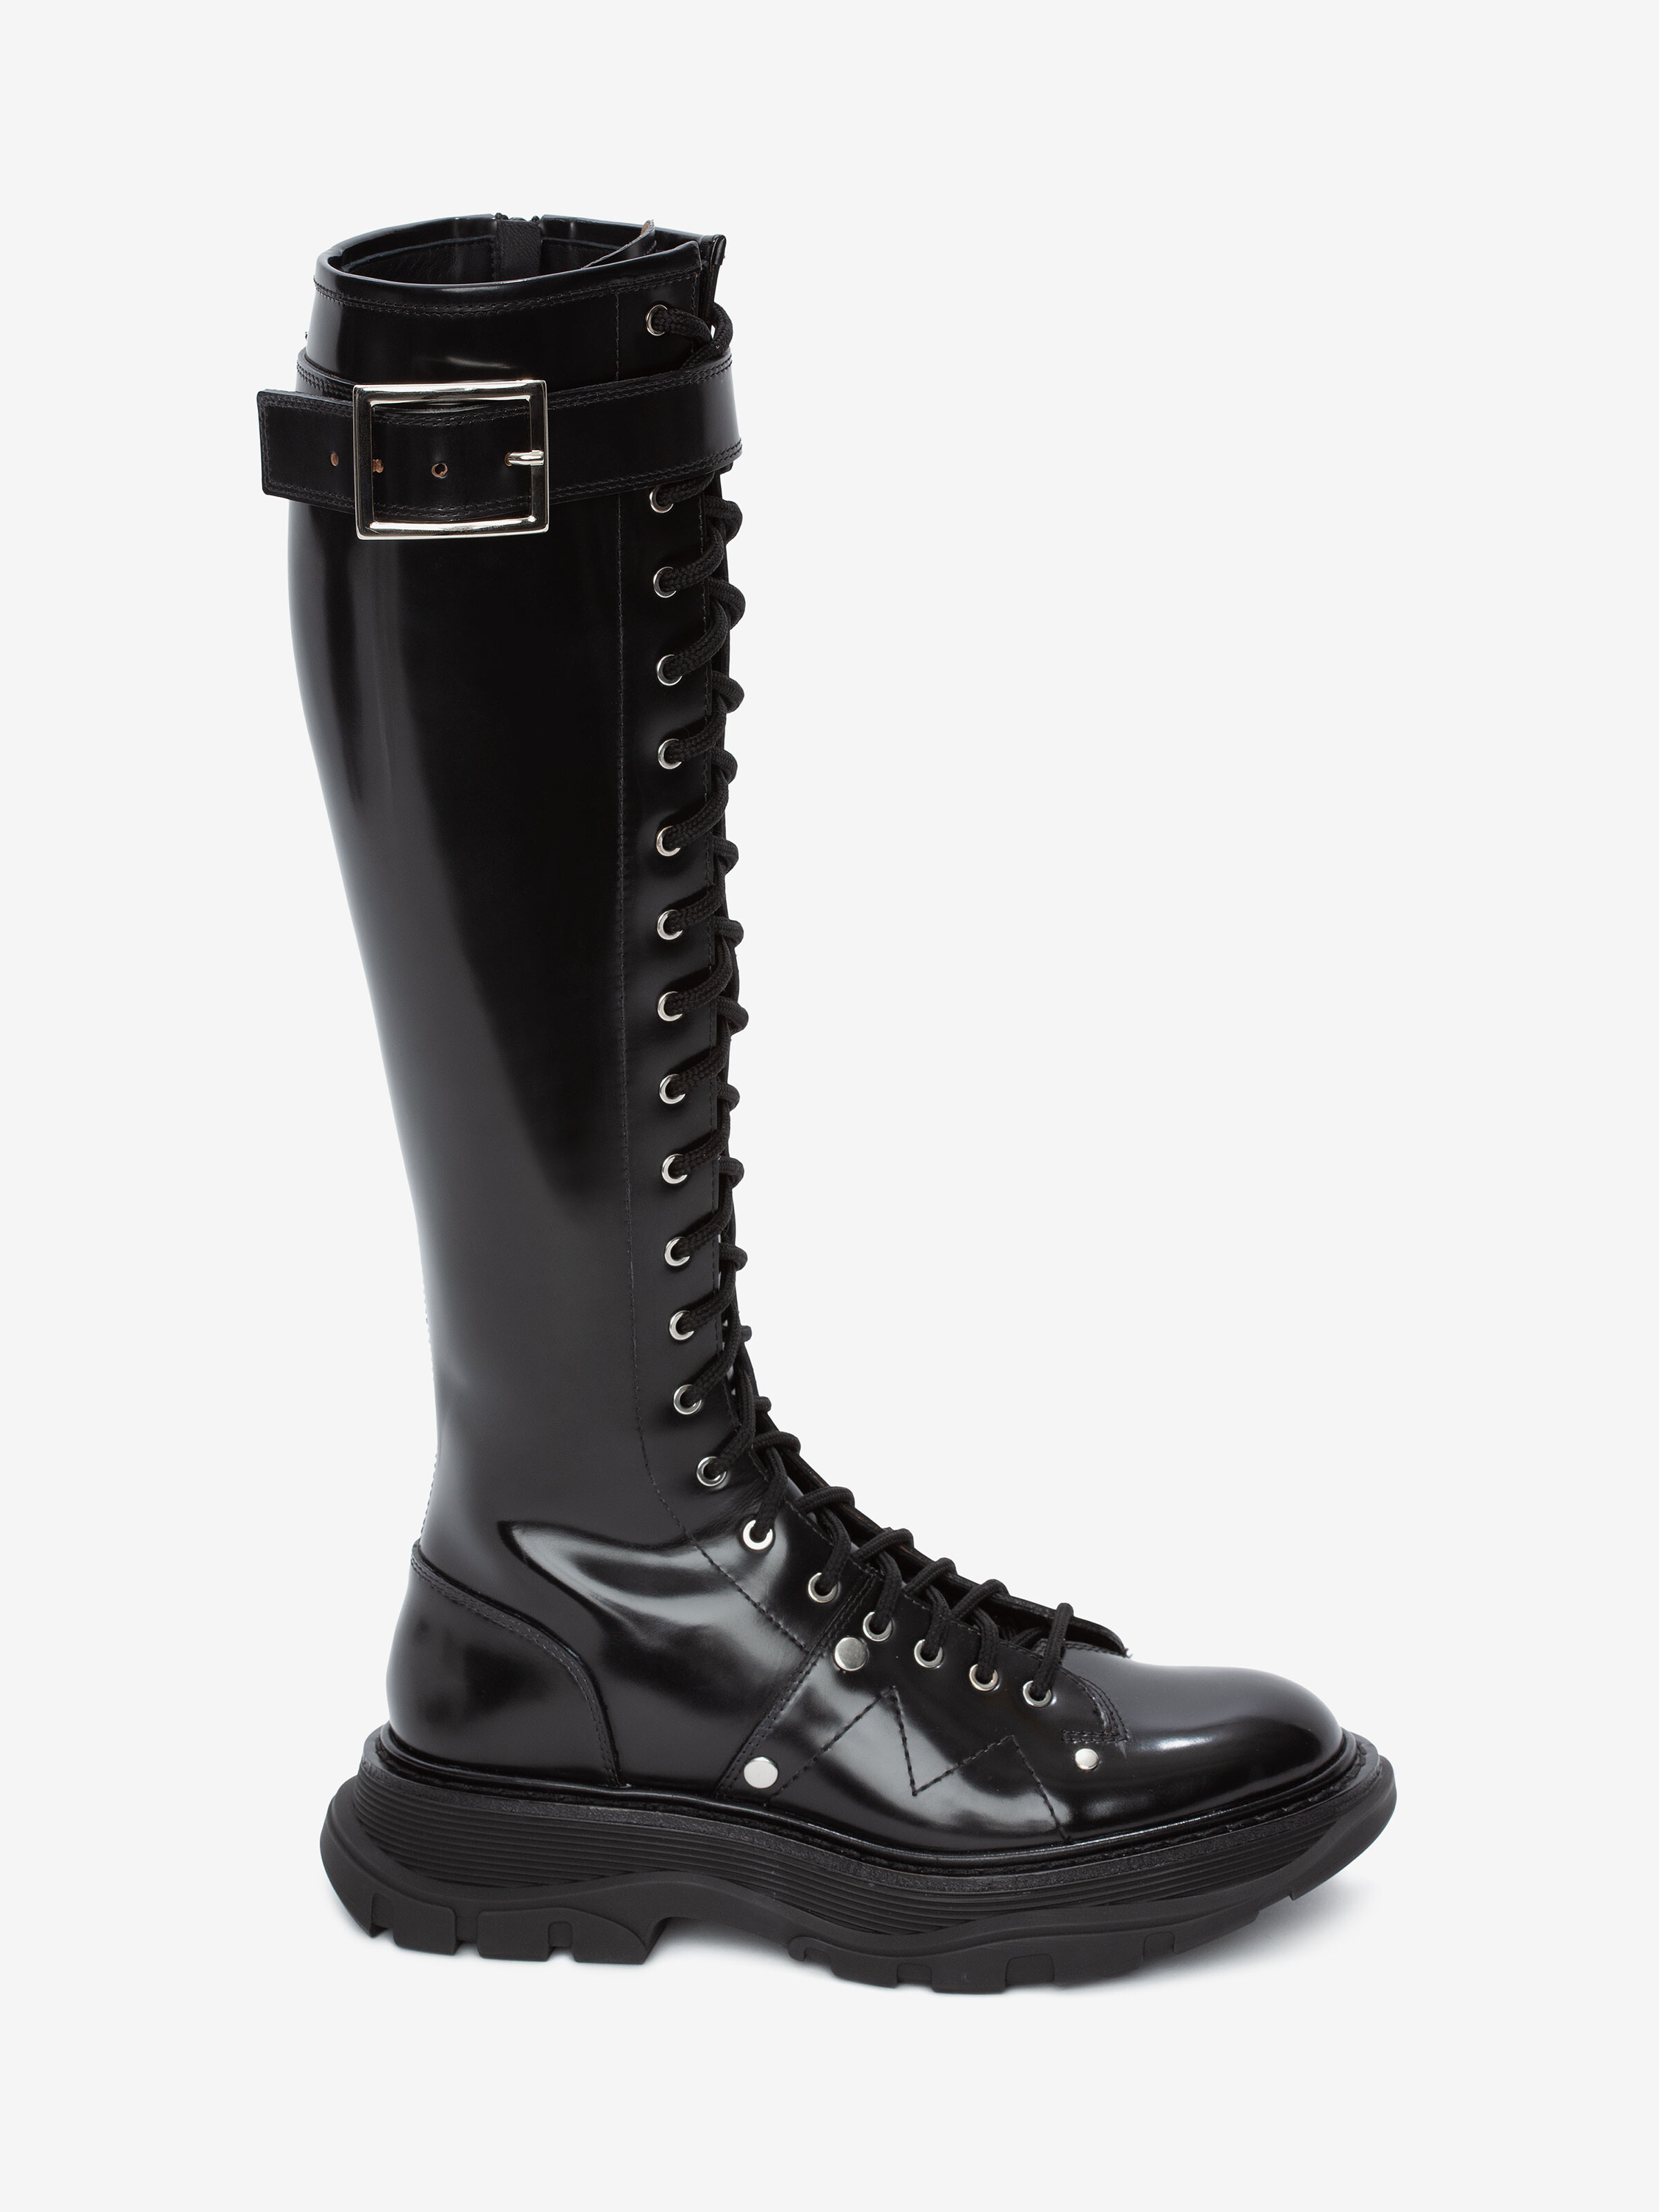 Tread Lace Up Boot in Black/Silver 